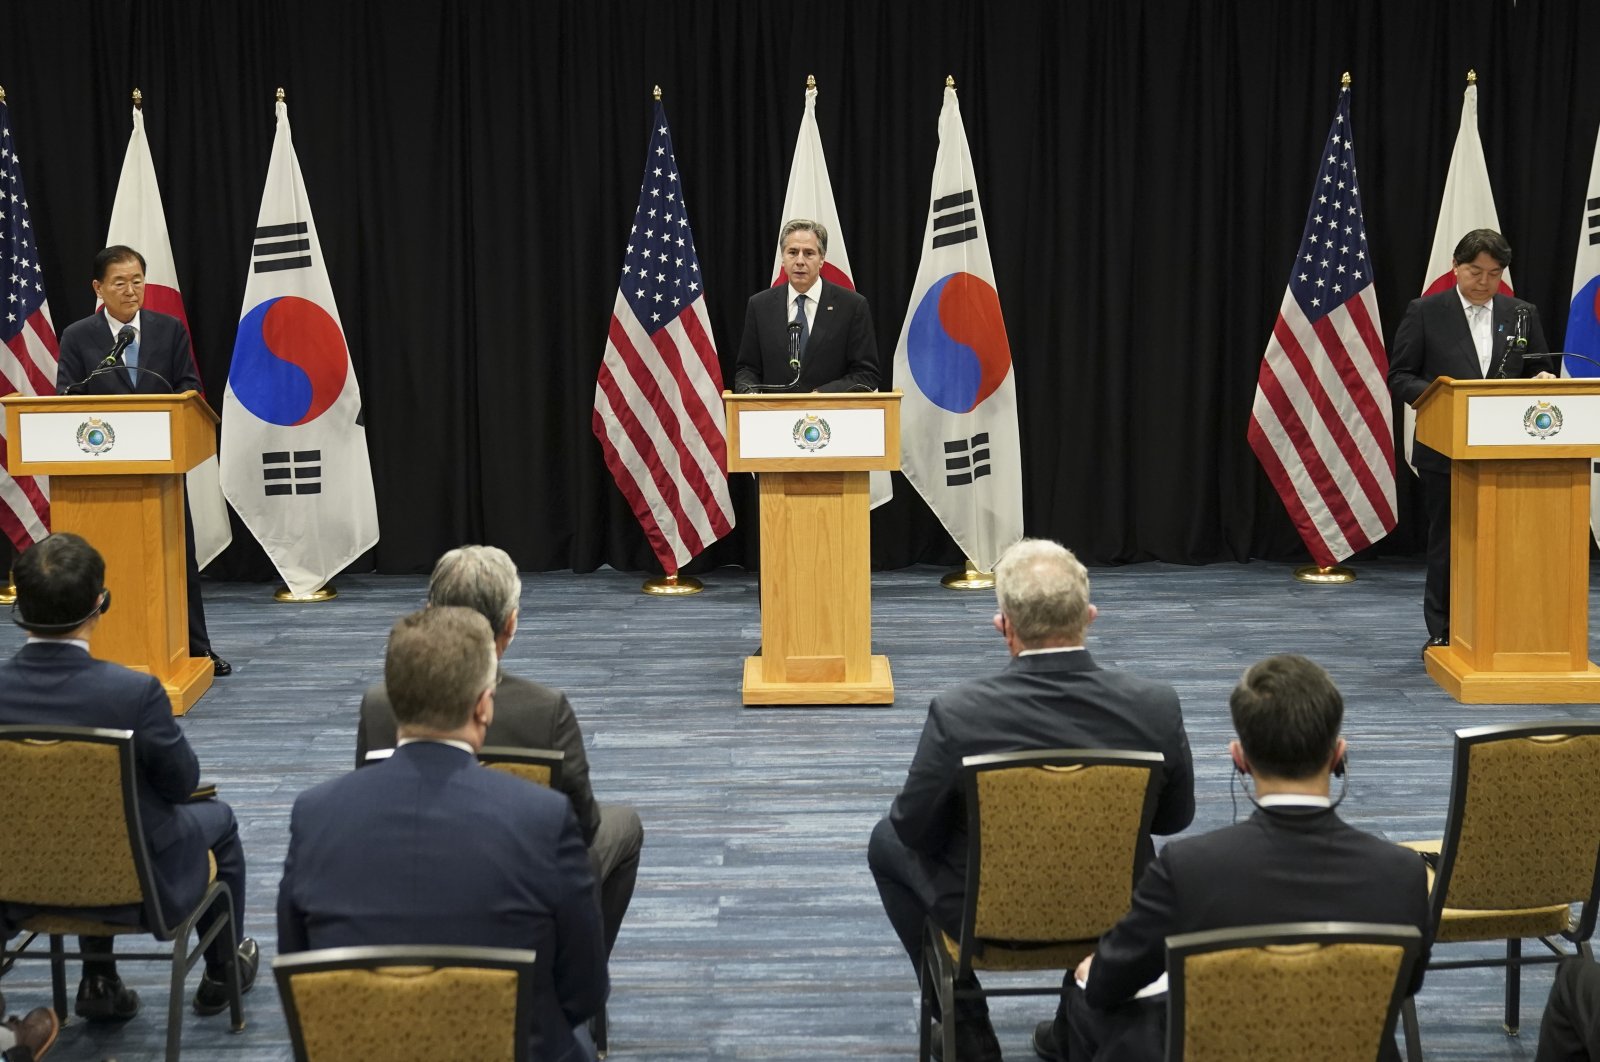 U.S. Secretary of State Antony Blinken speaks during a joint press availability with South Korean Foreign Minister Chung Eui-yong and Japanese Foreign Minister Yoshimasa Hayashi following their meeting in Honolulu, Saturday, Feb. 12, 2022. (Kevin Lamarque / Pool Photo via AP)